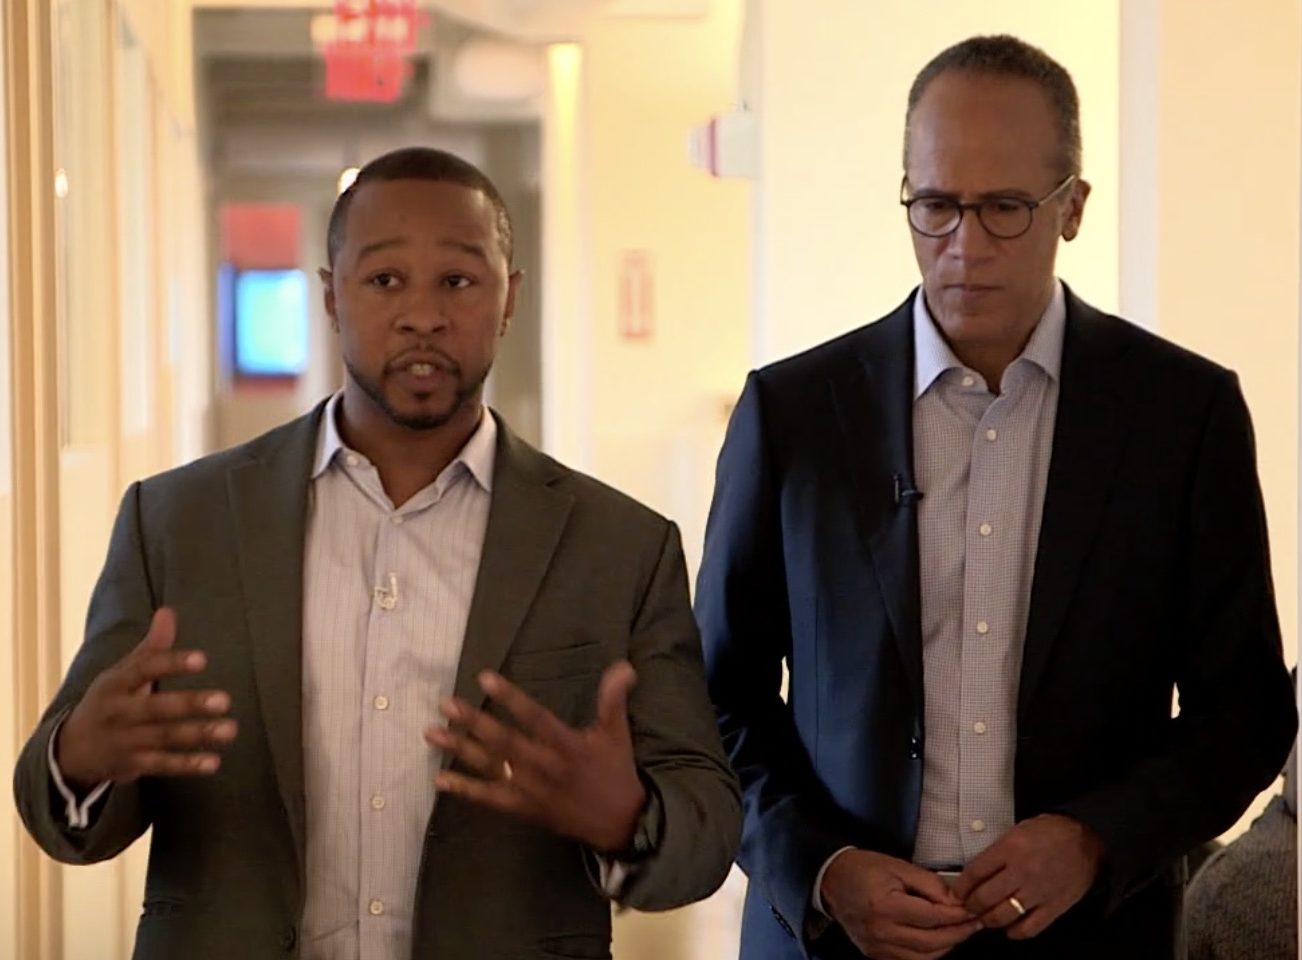 Innocence Project’s Jarrett Adams to be Featured on Nightly News with Lester Holt